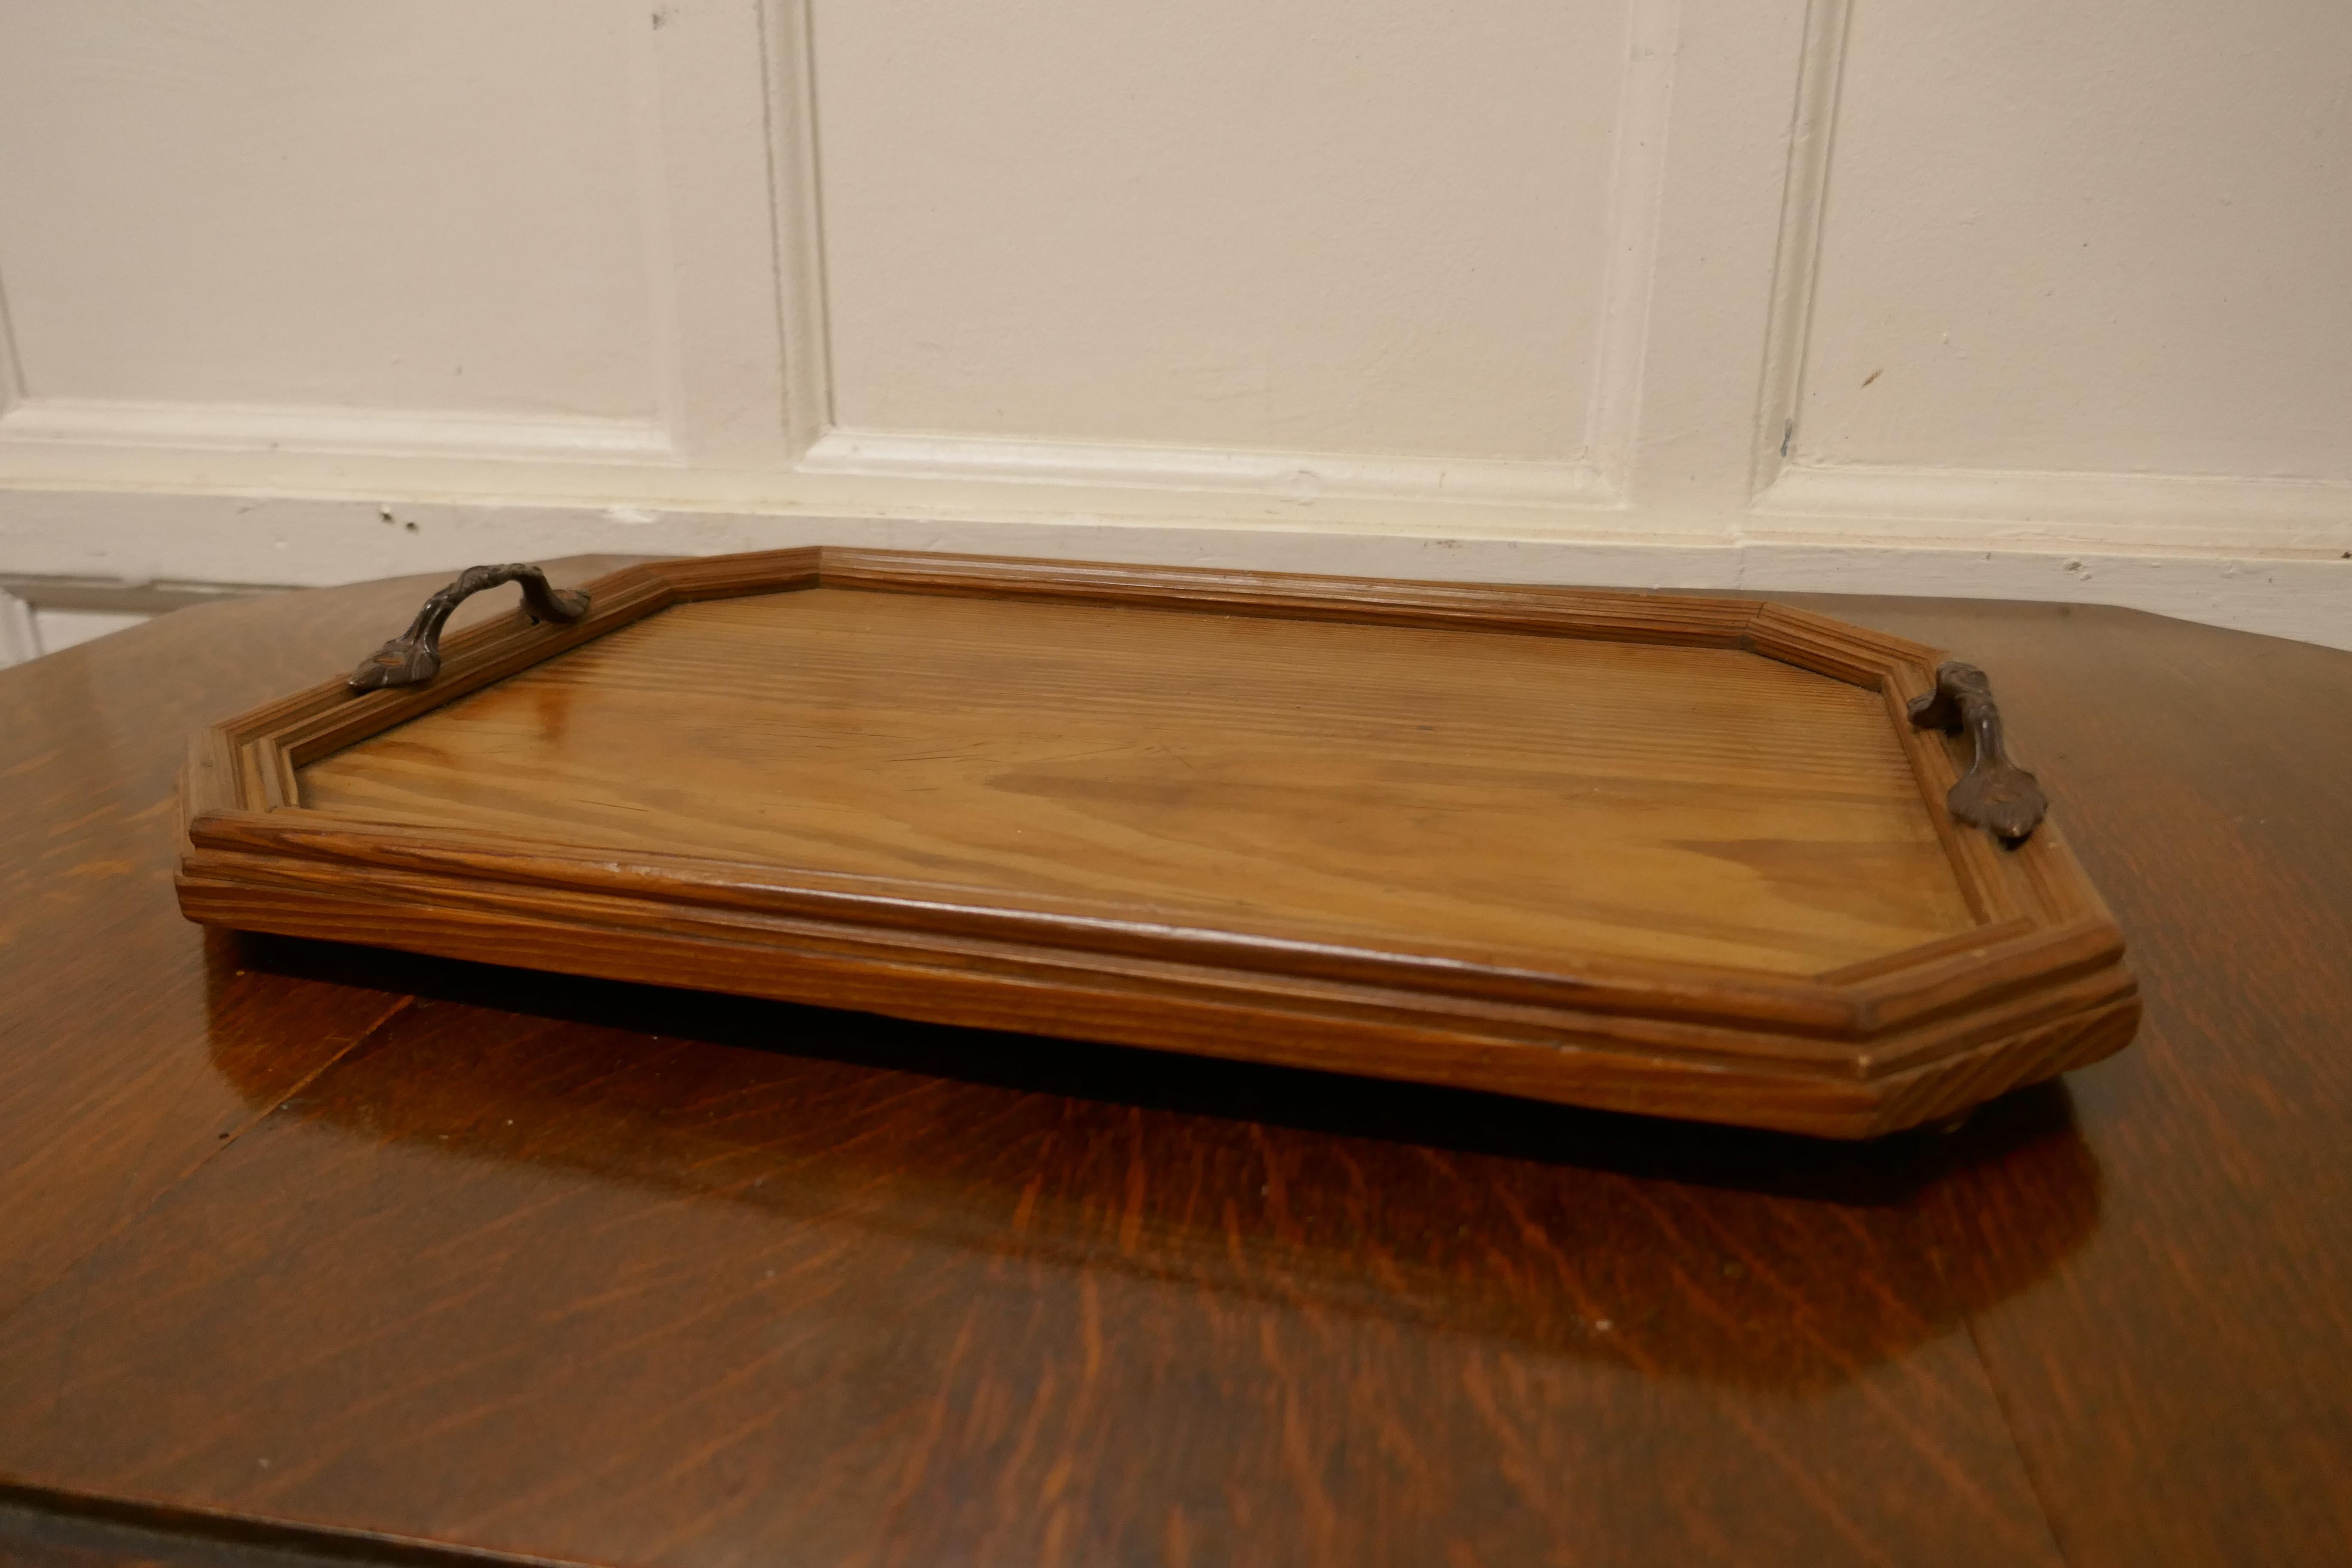 Pitch pine country tray

A good honest piece, the tray is made in pitch pine, it has a raised gallery, brass feet and carrying handles
A great piece in good condition 
The tray is 2” high, 17” long and 12” across
TGB709.